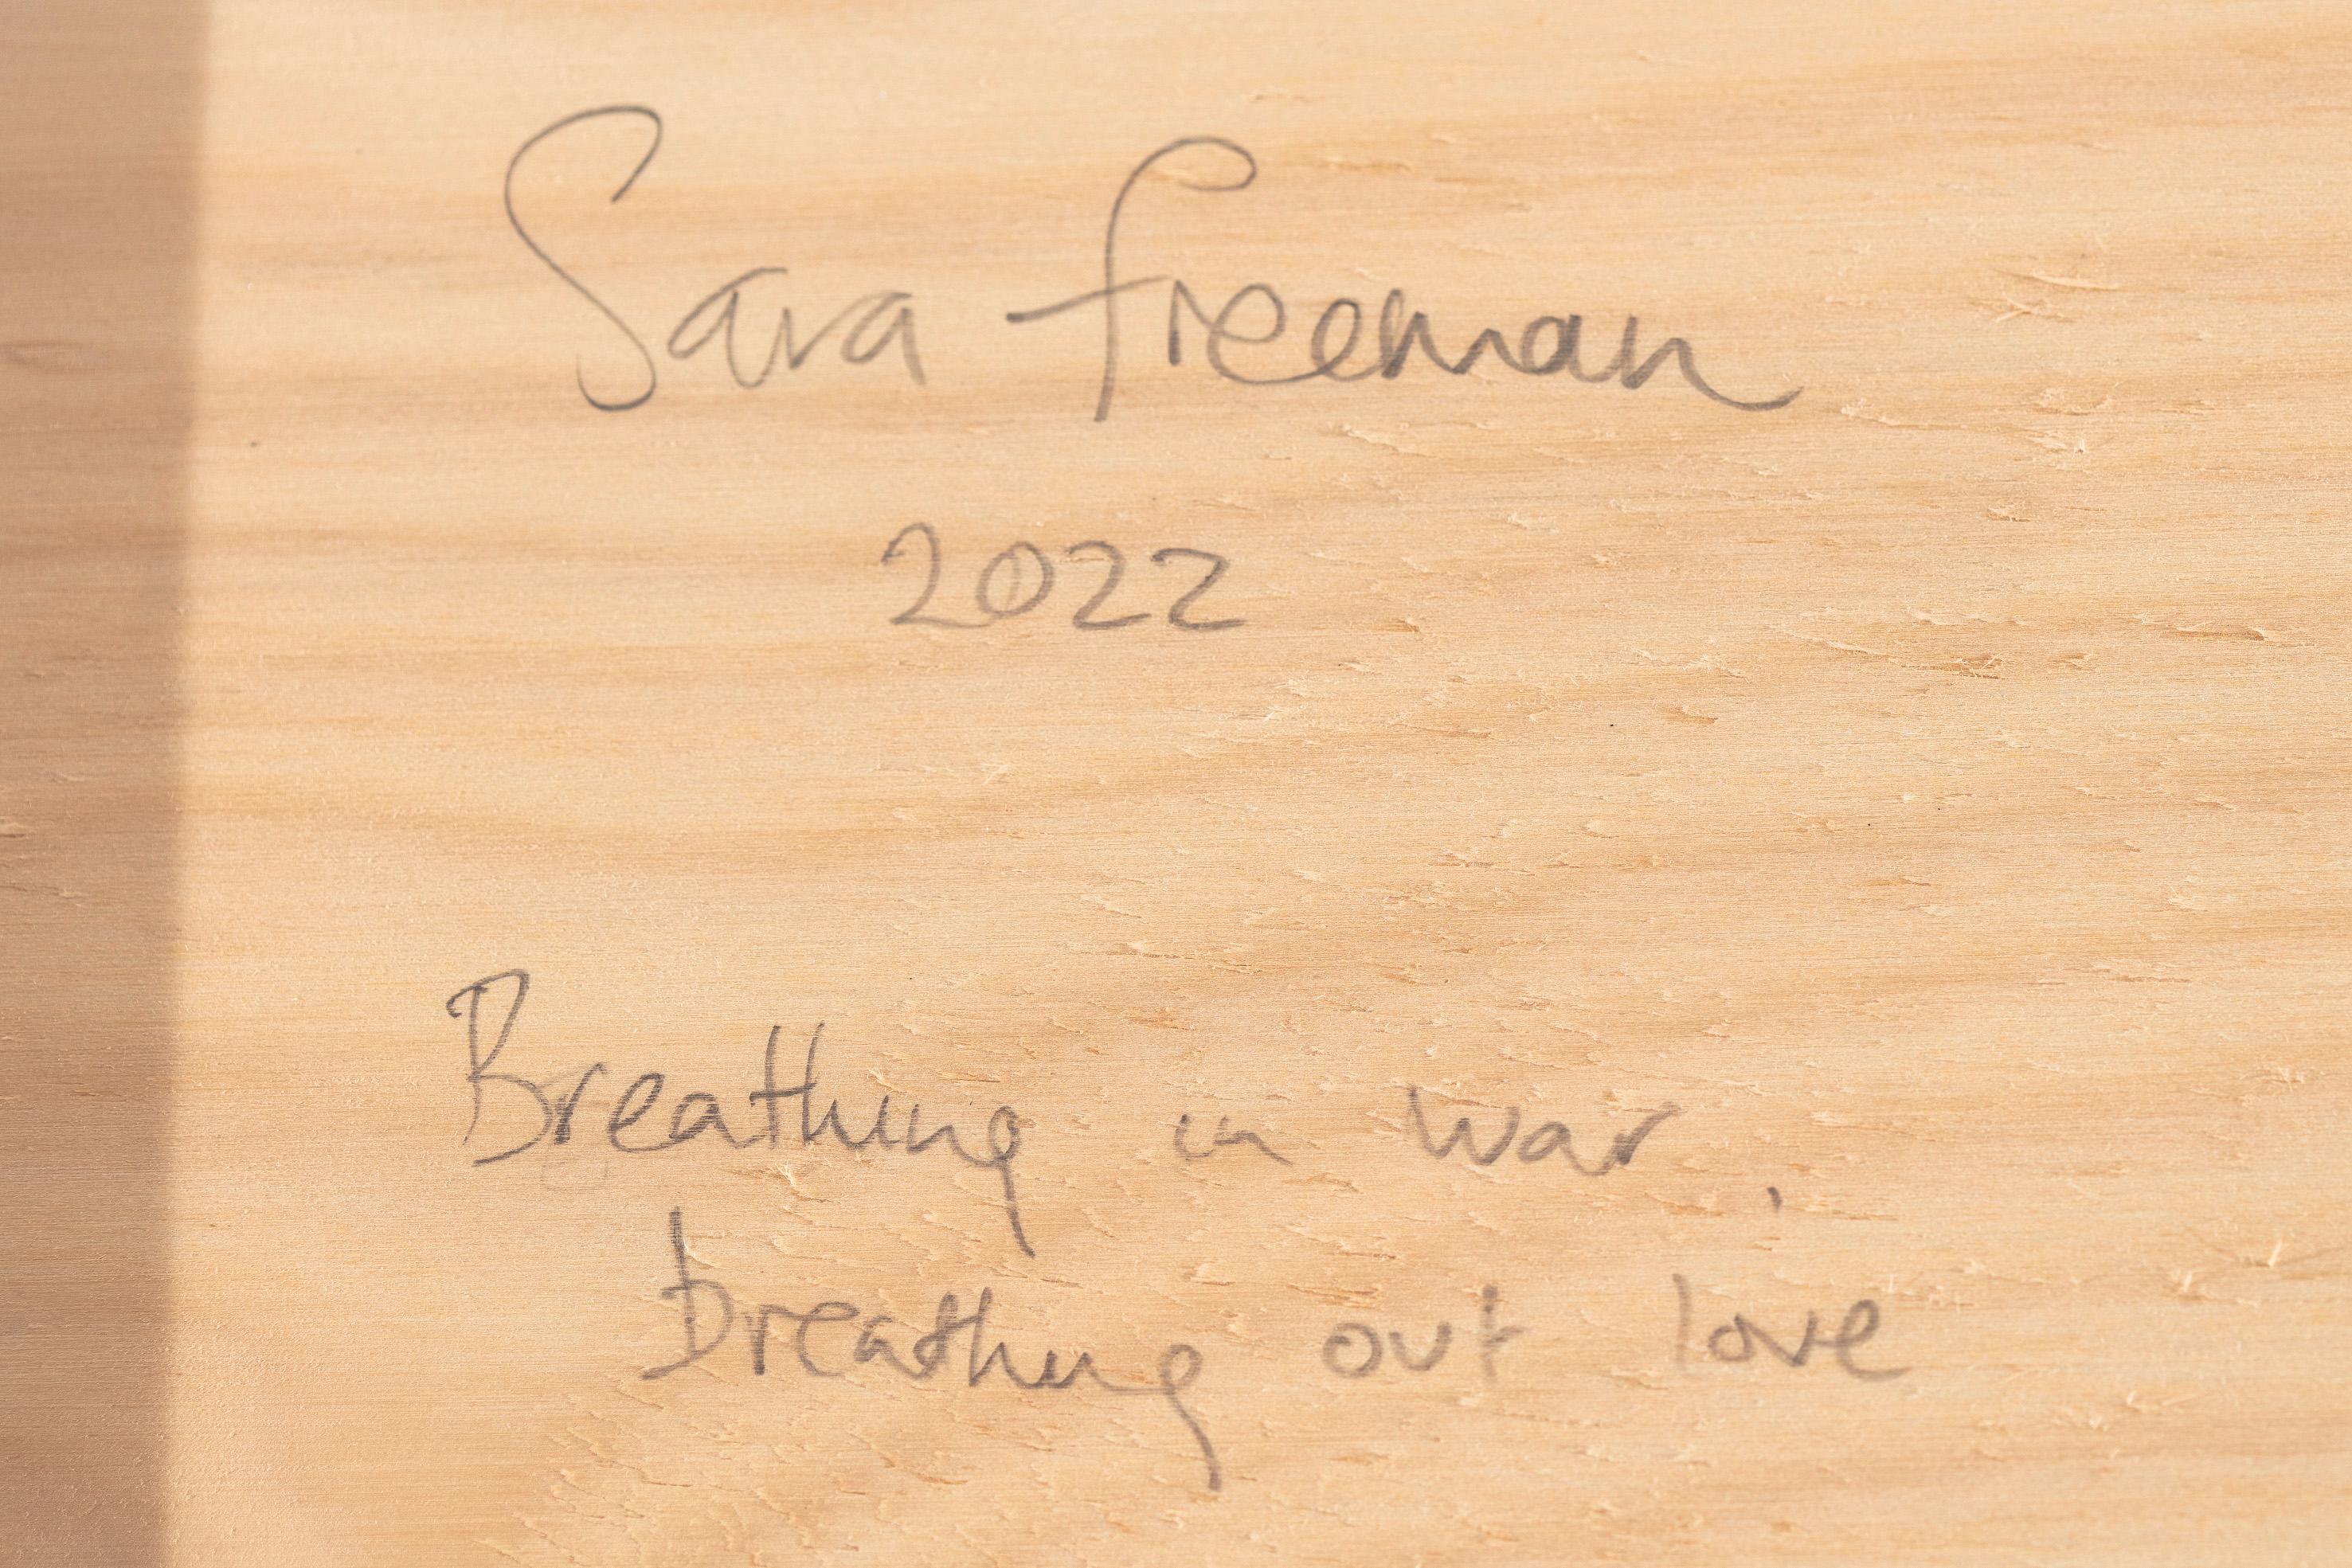 Breathing in War, Breathing out Love an original painting by Sara Freeman For Sale 3